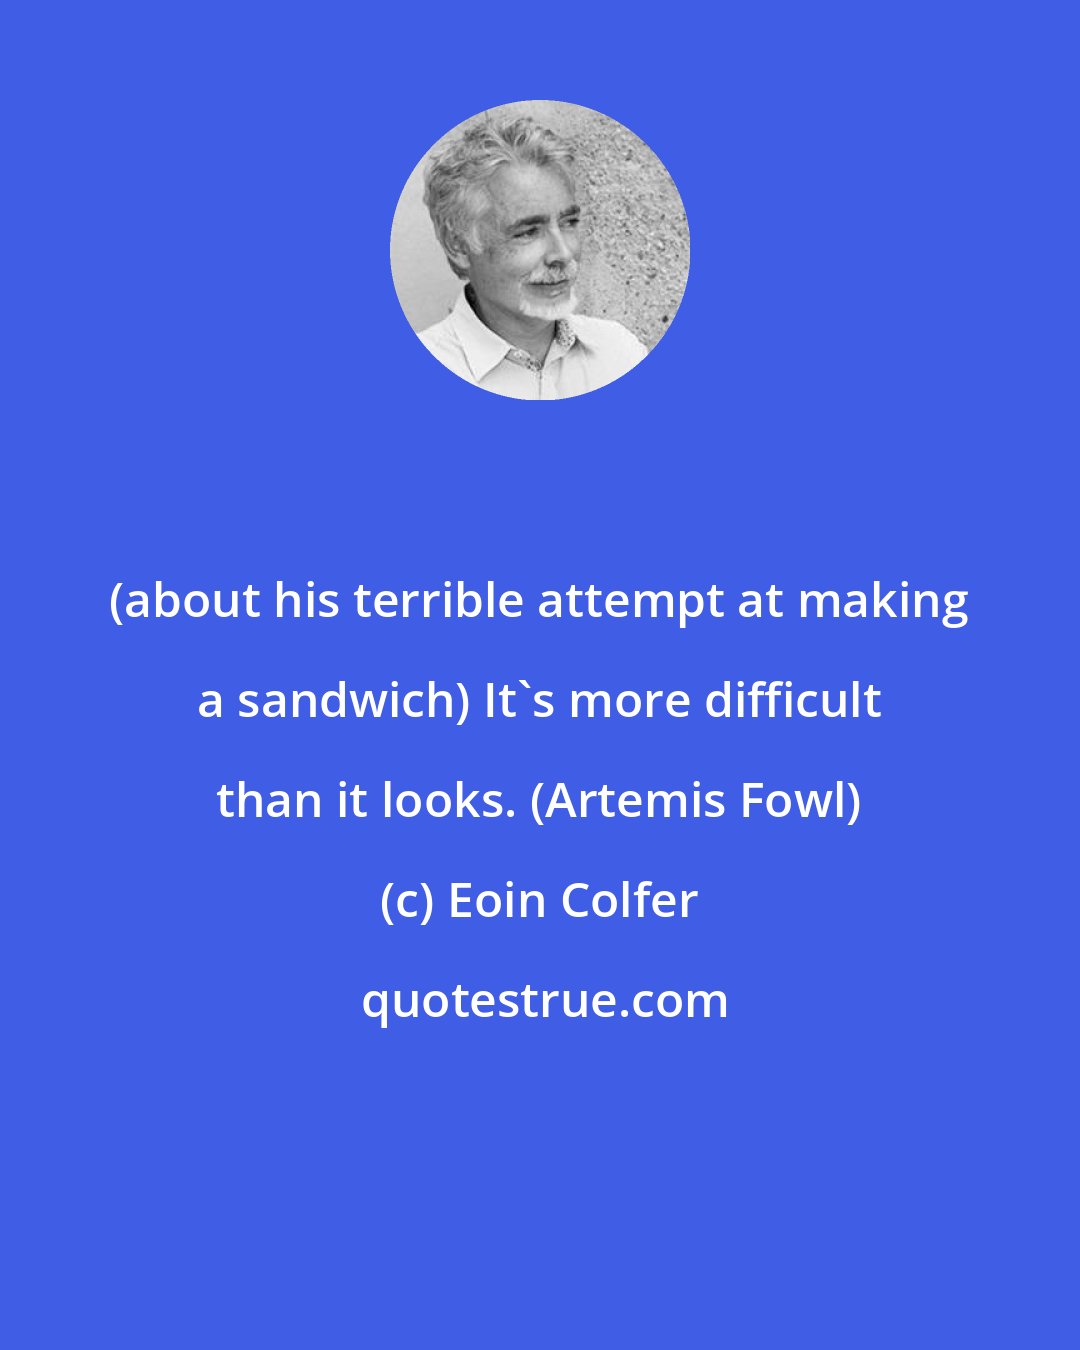 Eoin Colfer: (about his terrible attempt at making a sandwich) It's more difficult than it looks. (Artemis Fowl)